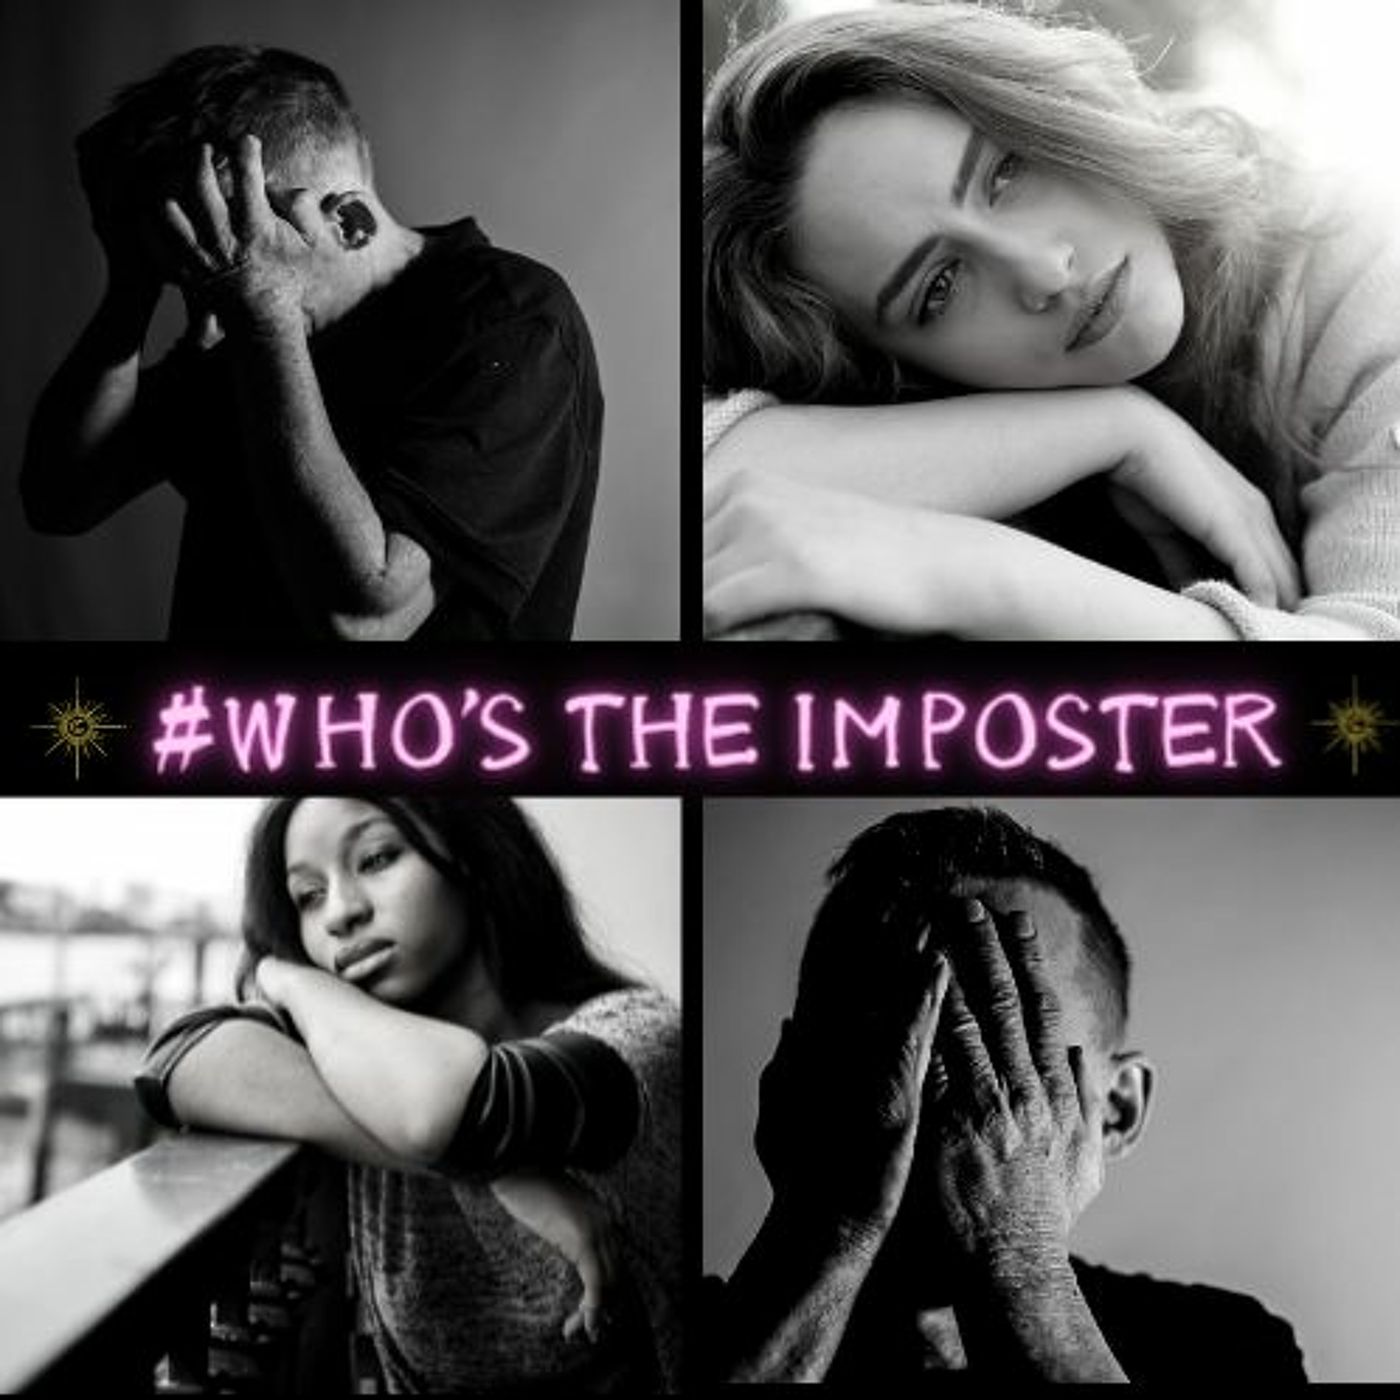 #WHO'S THE IMPOSTER?